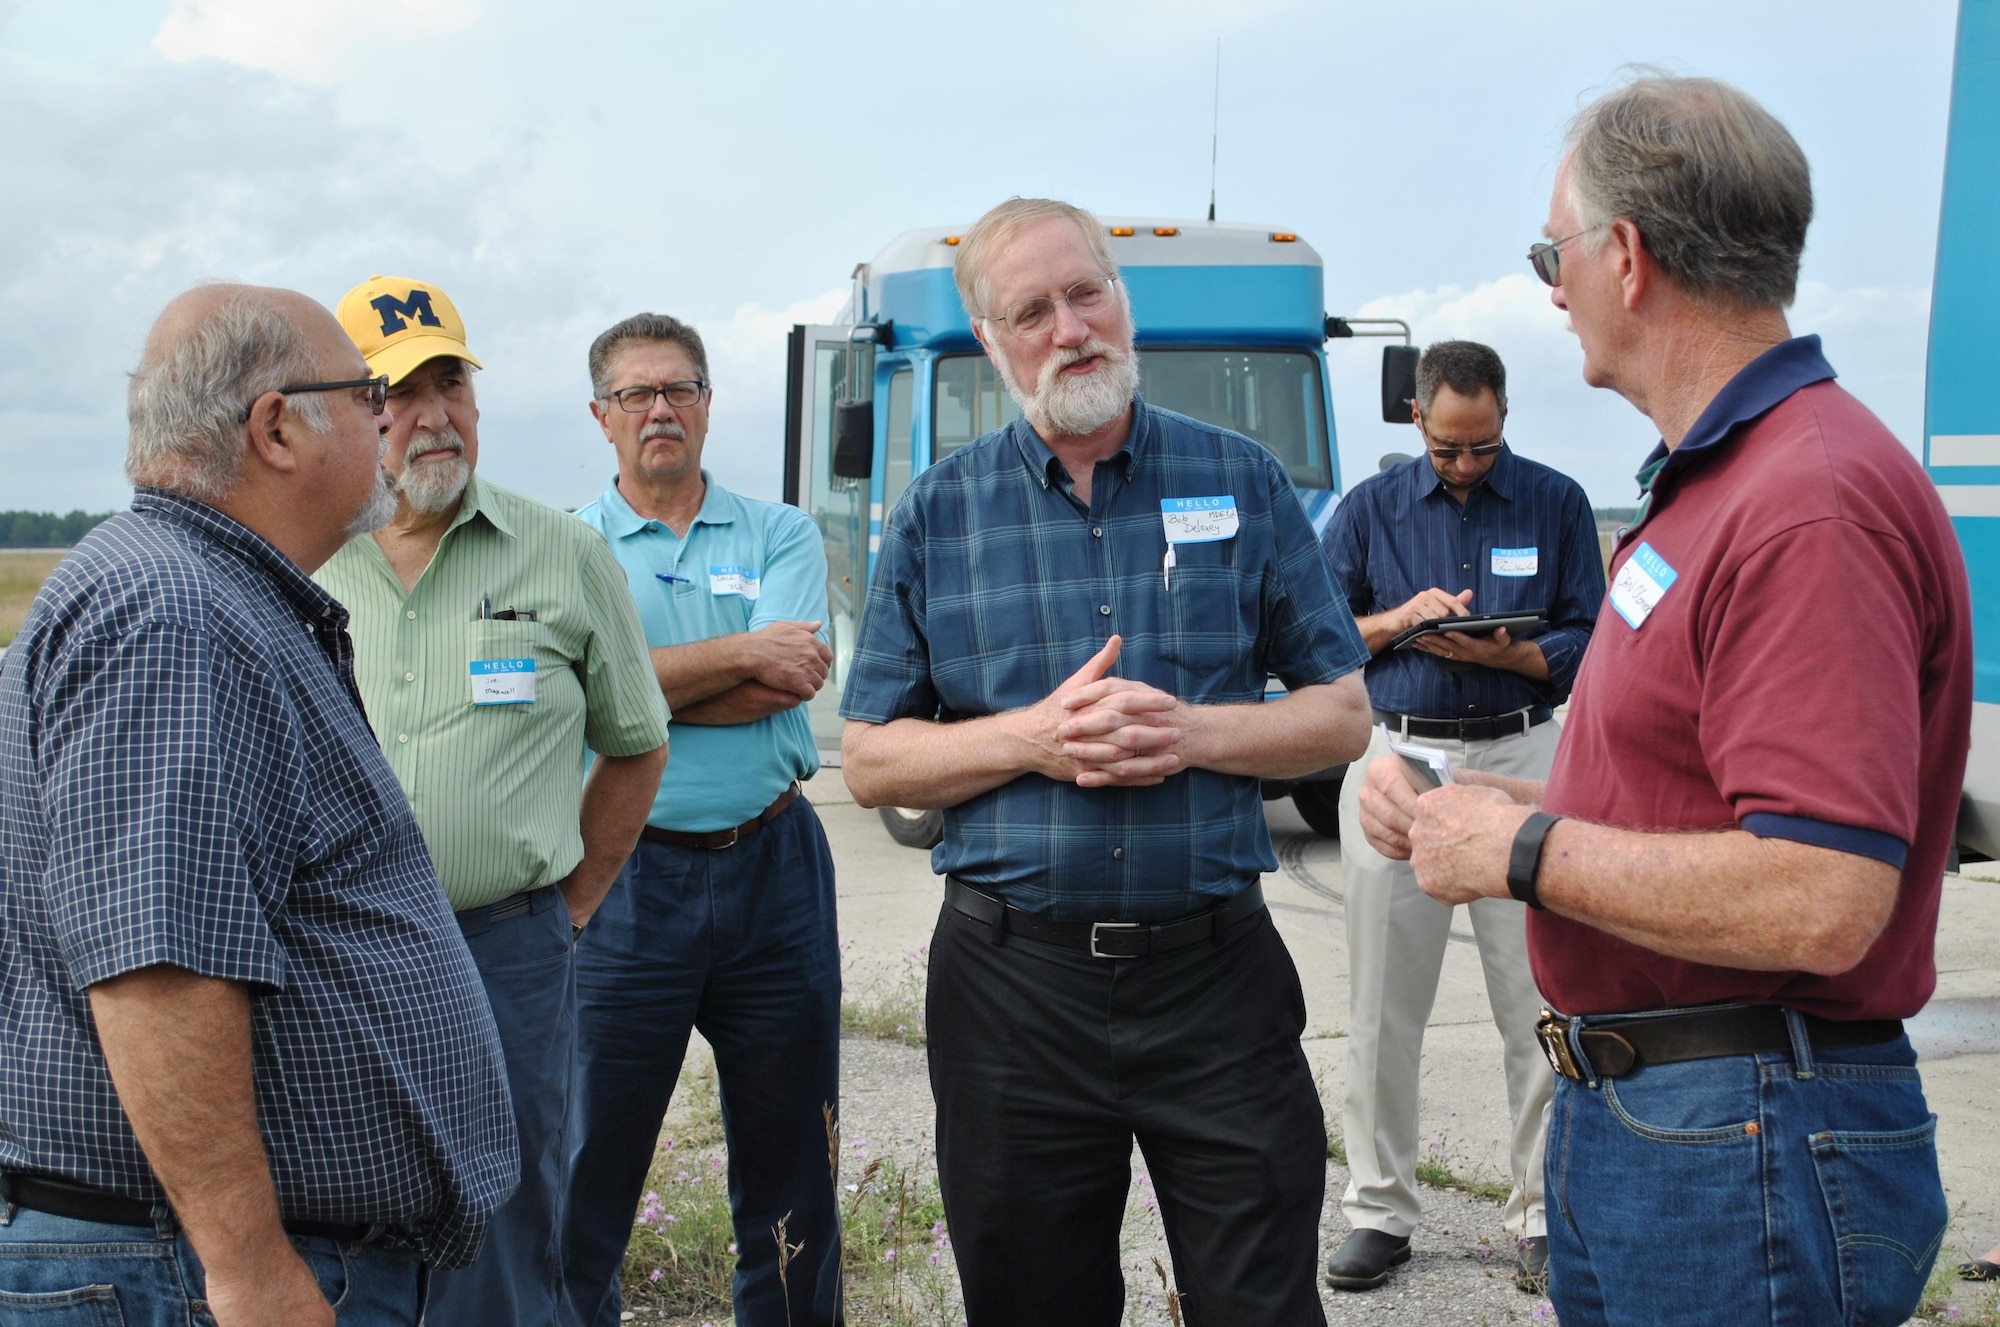 Bob Delaney, an environmental quality specialist with the Michigan Department of Environmental Quality, talks to fellow members of the Wurtsmith Restoration Advisory Board